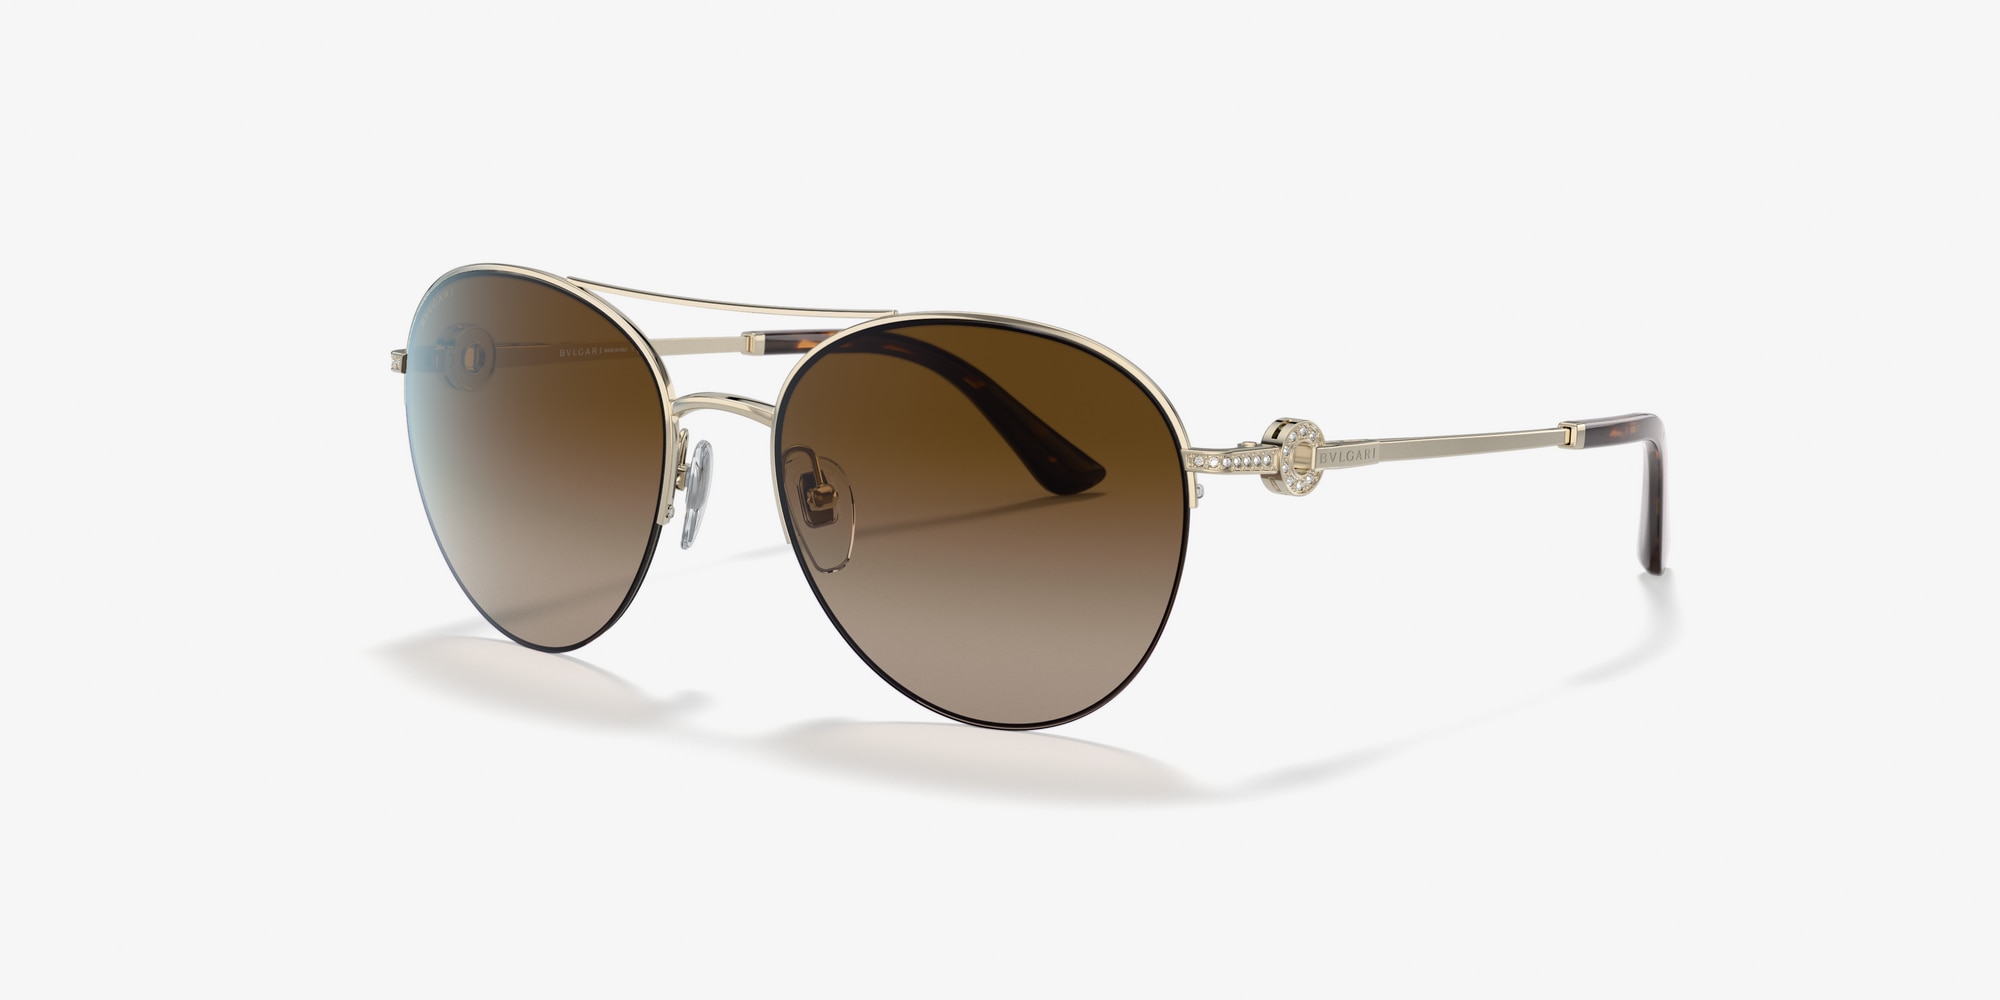 is bvlgari a good brand for sunglasses